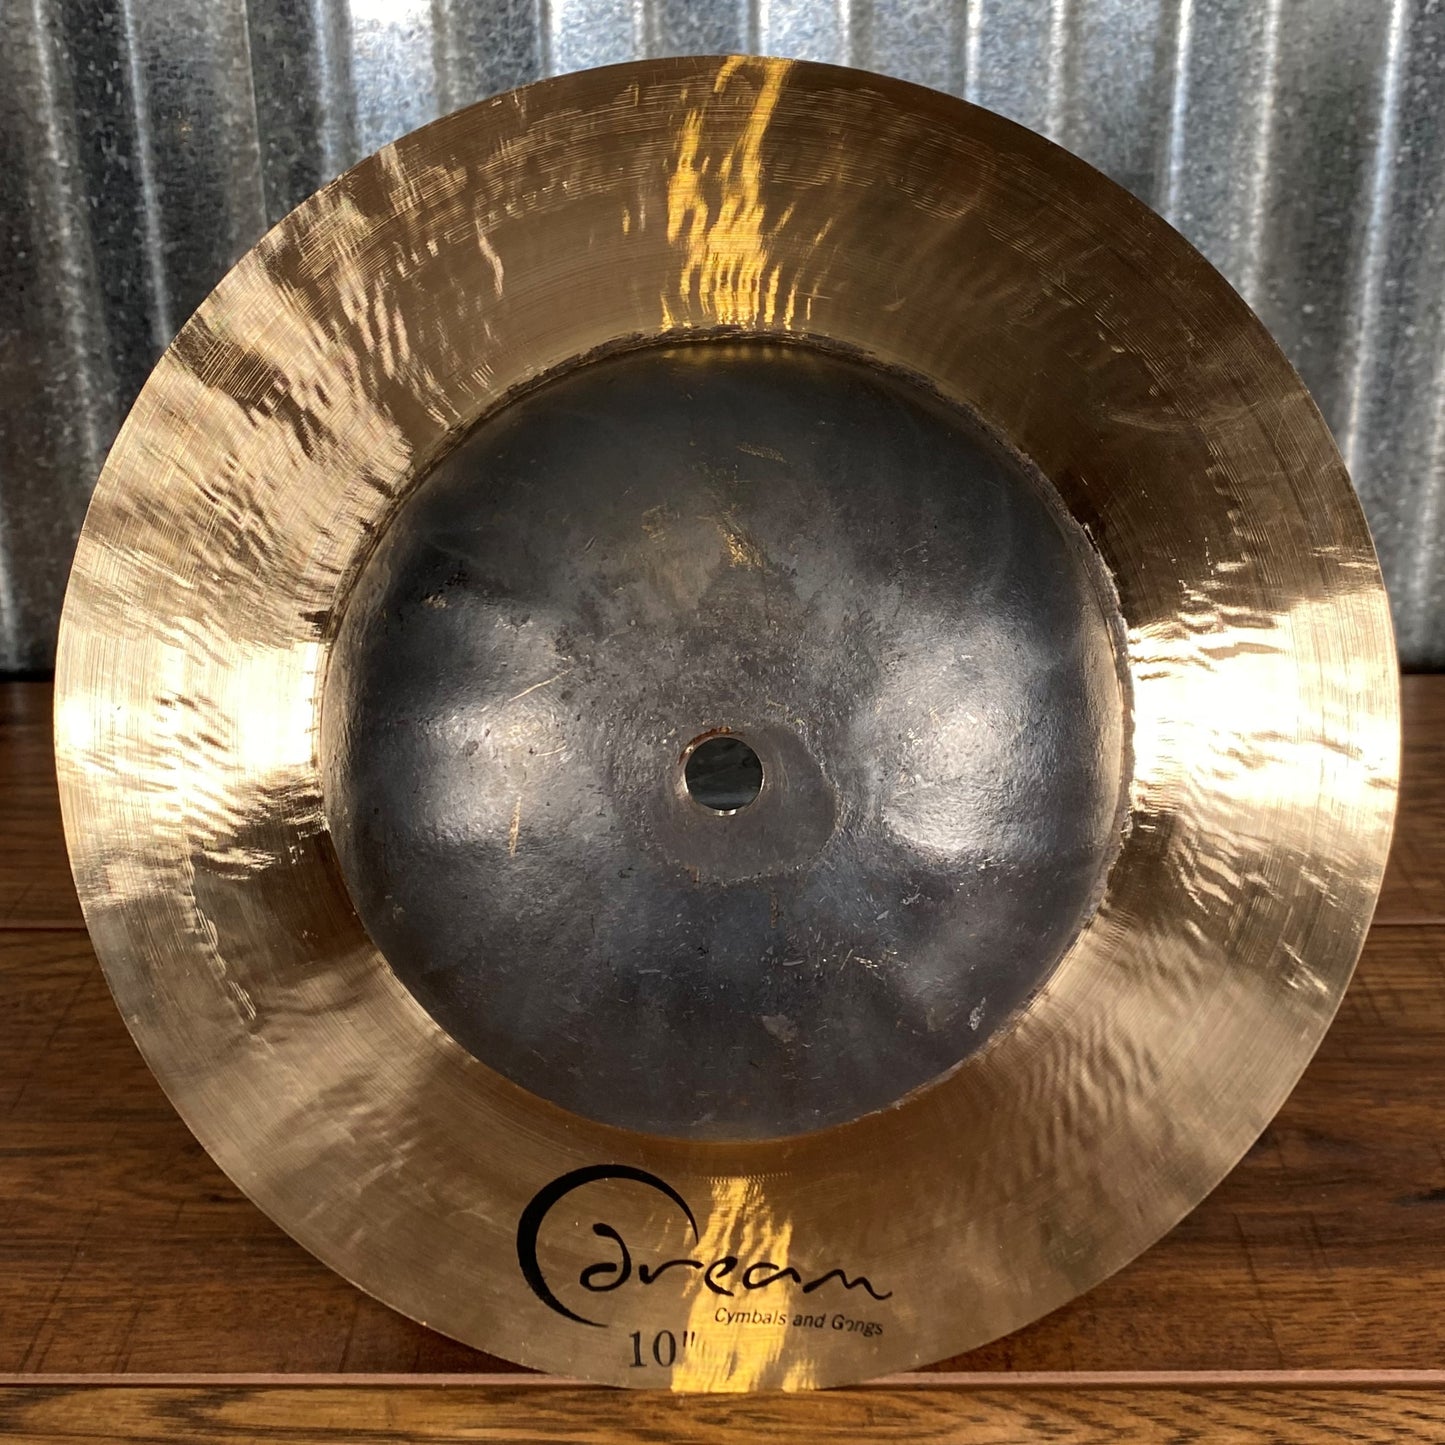 Dream Cymbals REFX-HAN10 Recycled RE-FX Han Effect 10" Cymbal Demo